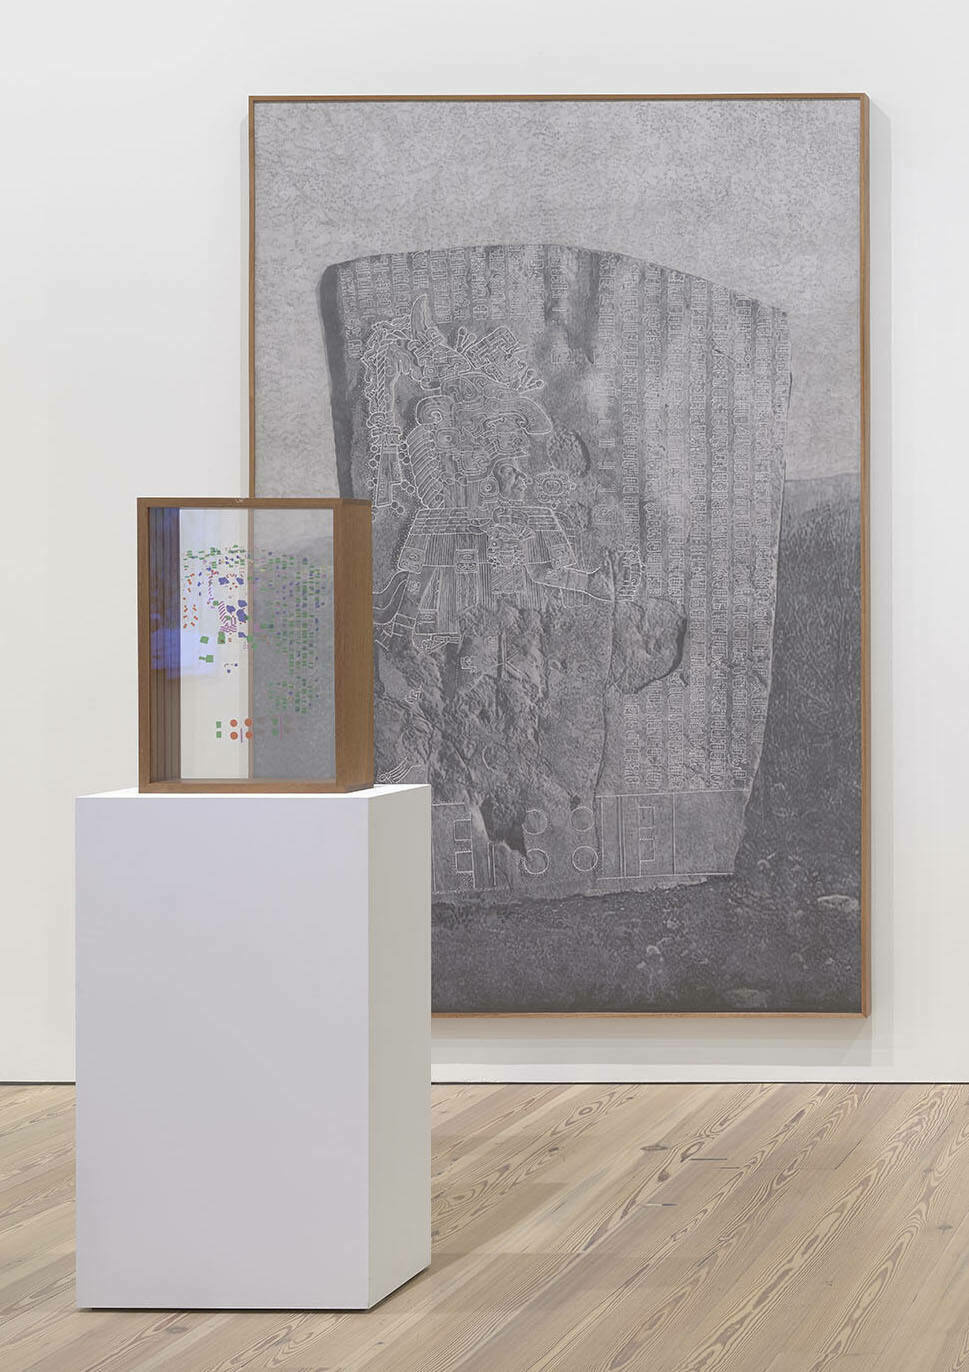 A meticulous graphite drawing of La Mojarra Stela sits behind a wooden box of plexiglass slides with colorful characters